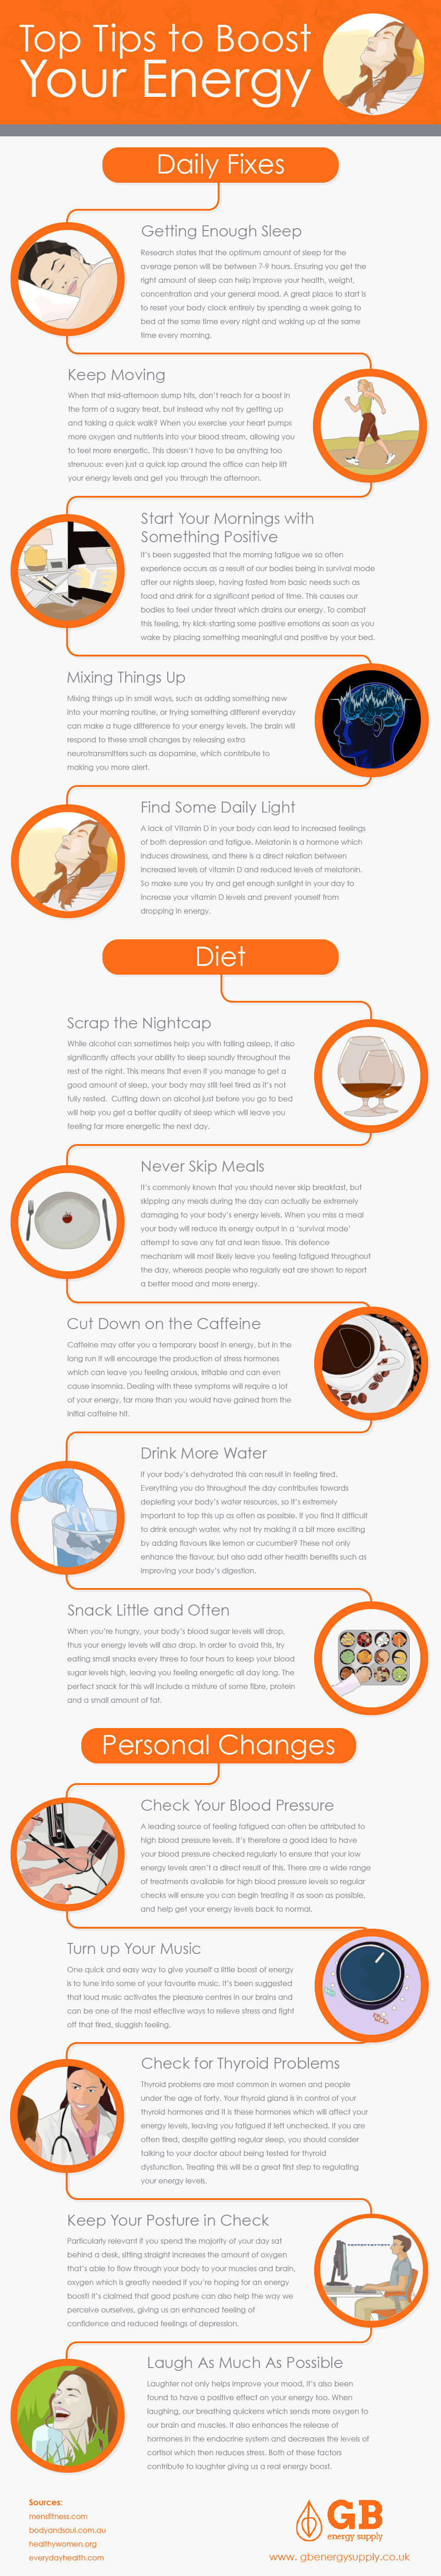 Top Tips to Skyrocket Your Energy Throughout The Day Infographic